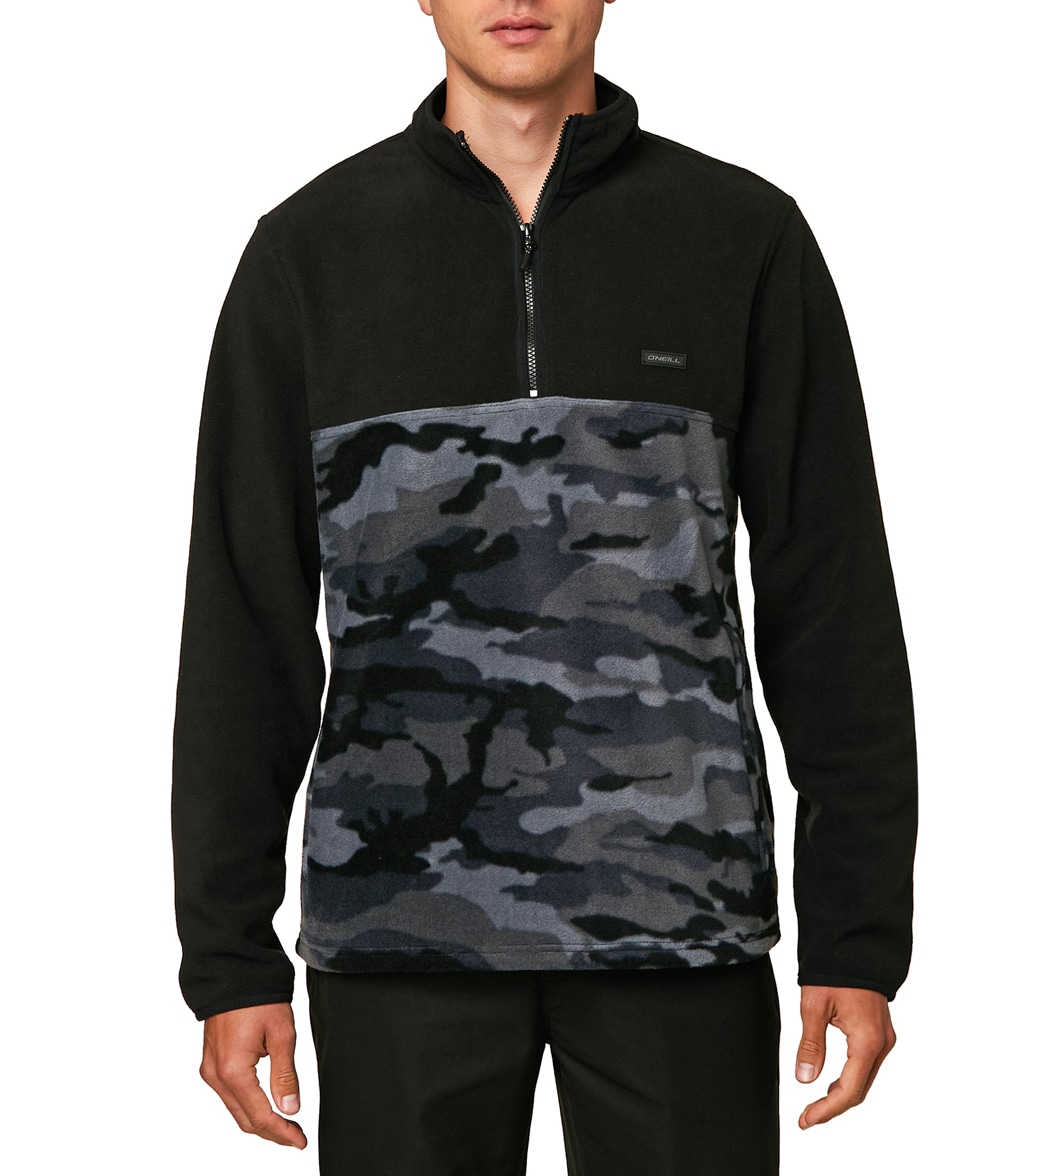 O'neill Men's Traveler Conway Pullover - Black Large Polyester - Swimoutlet.com